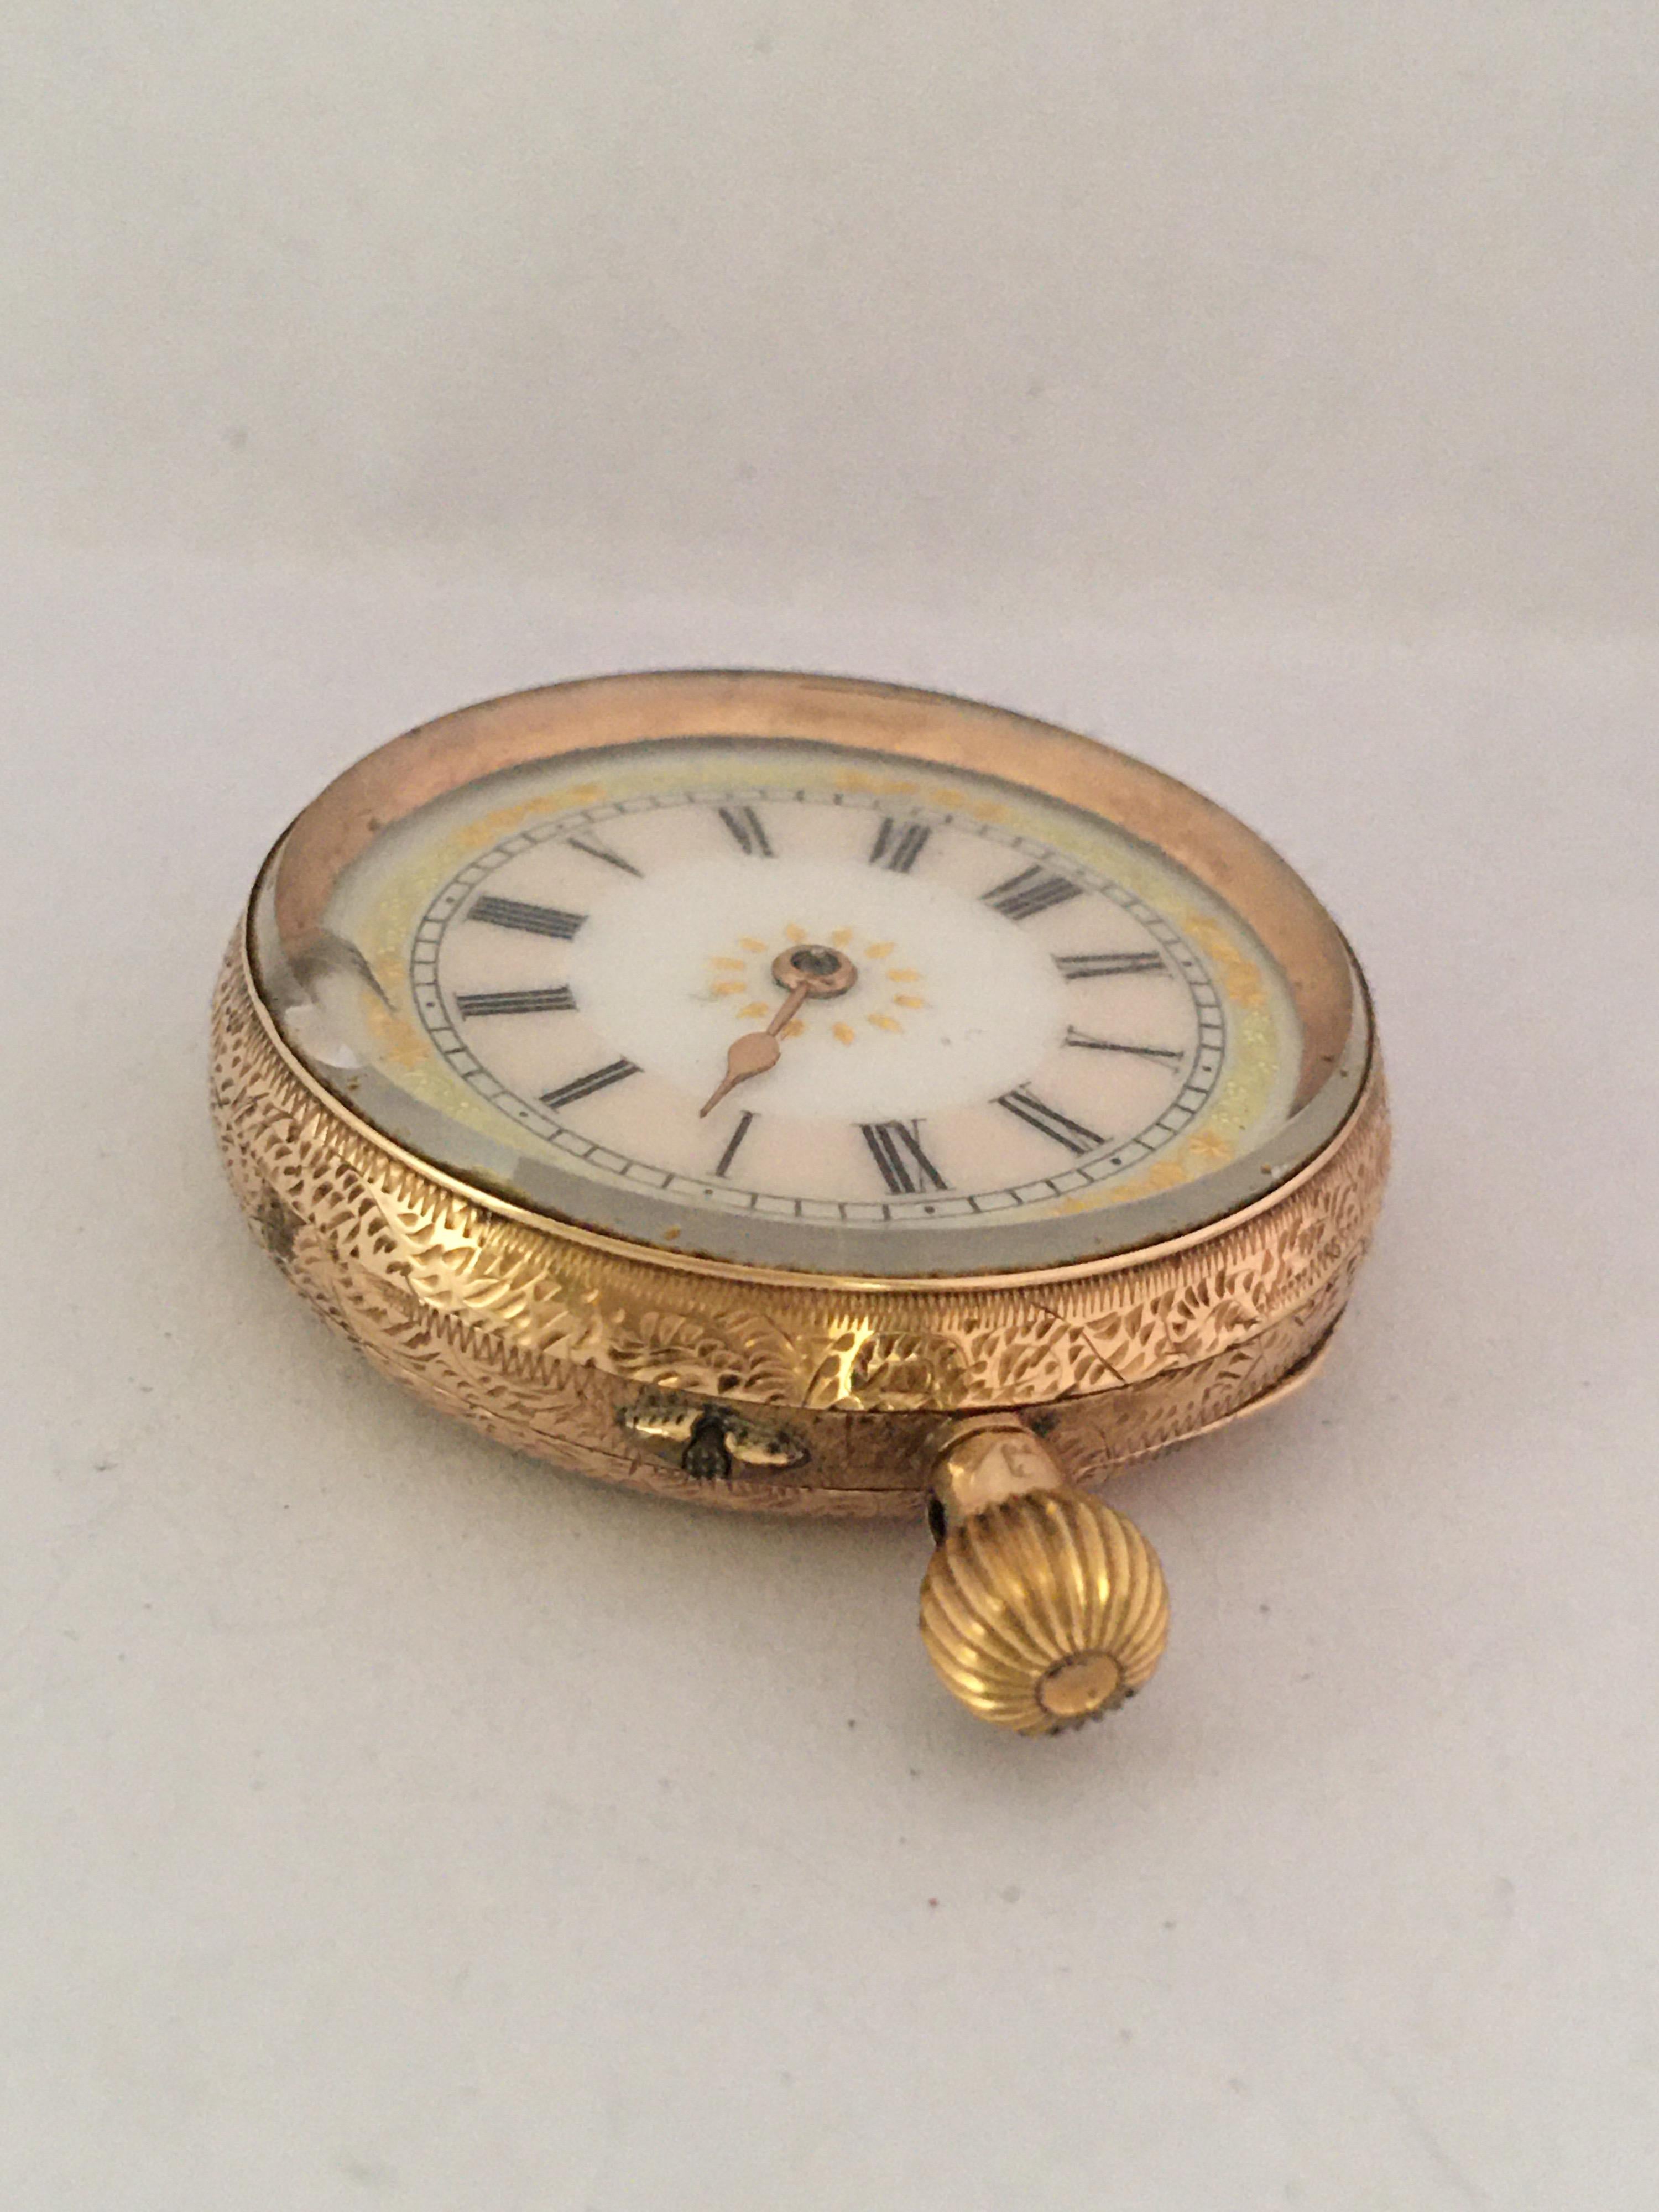 14 Karat Gold Antique Pin Set and Hand Winding Ladies Fob / Pocket Watch In Fair Condition For Sale In Carlisle, GB